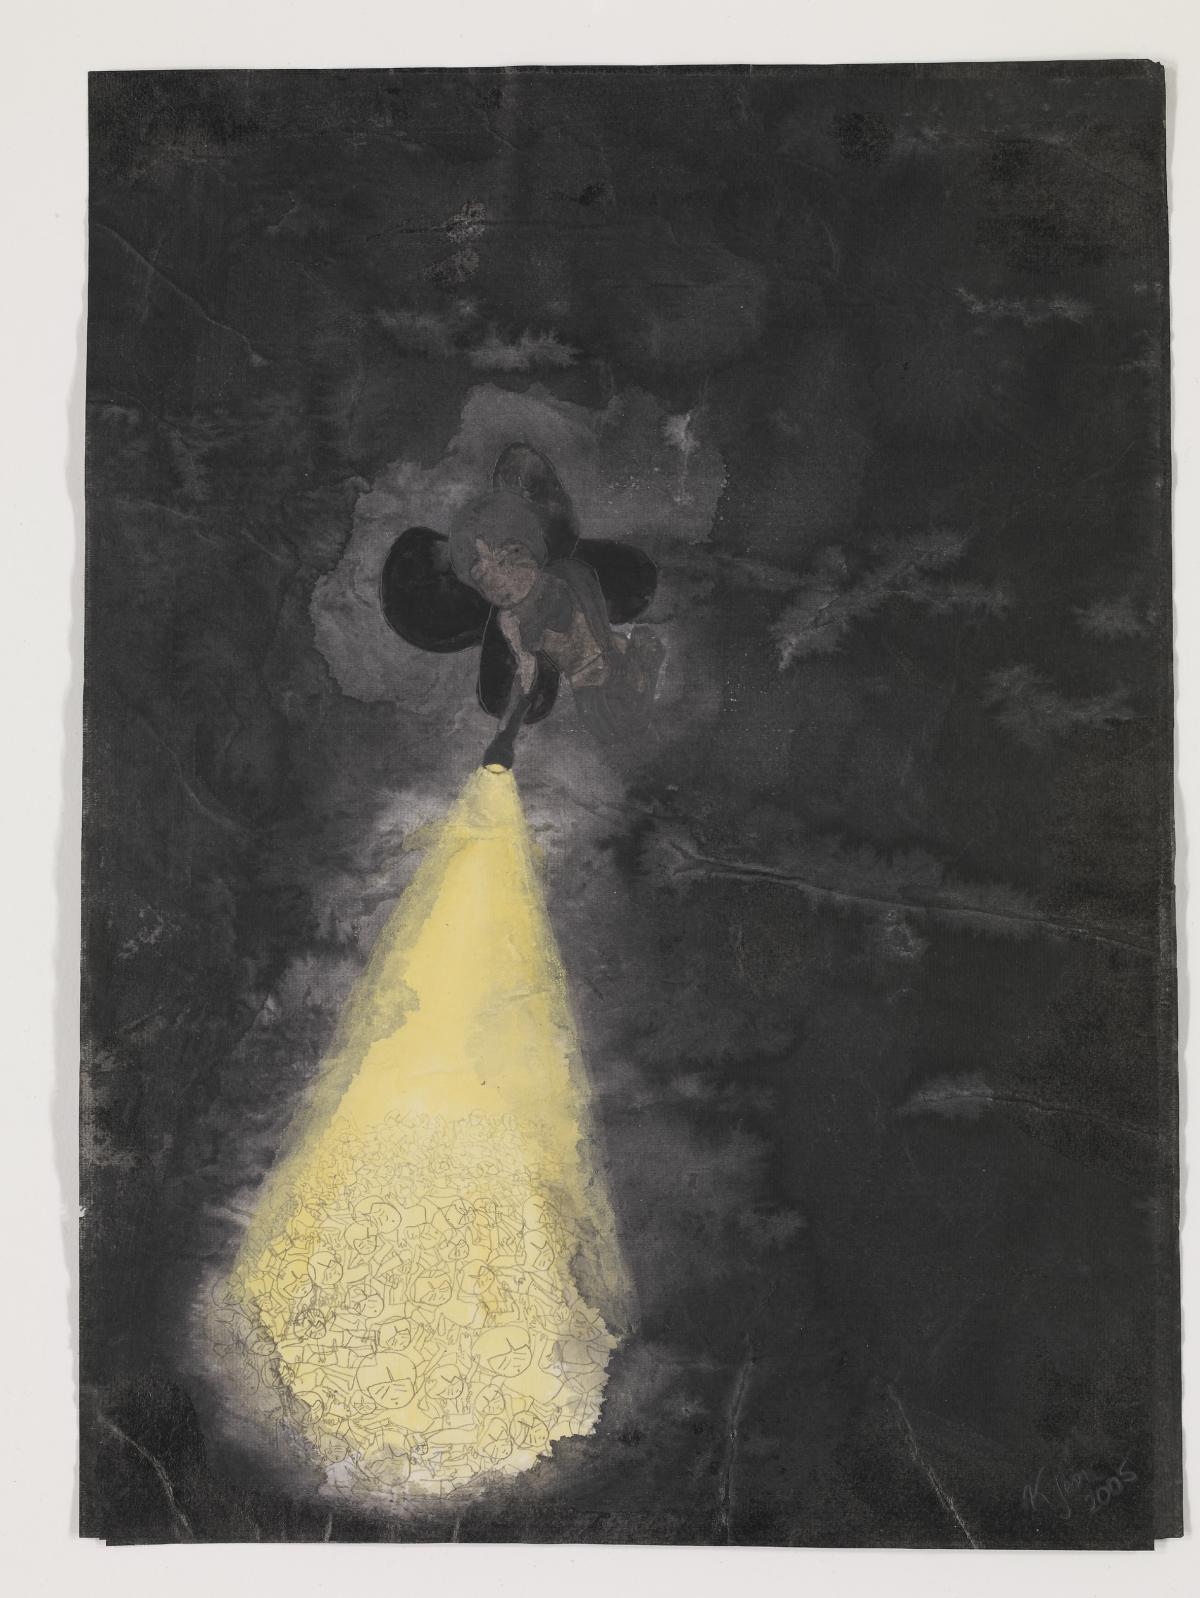 Artwork by Kyung Jeon titled Flashlight, 2005, Graphite, gouache, sumi ink, watercolor on rice paper, 13 x 9.5 inches, 33 x 24.1 cm